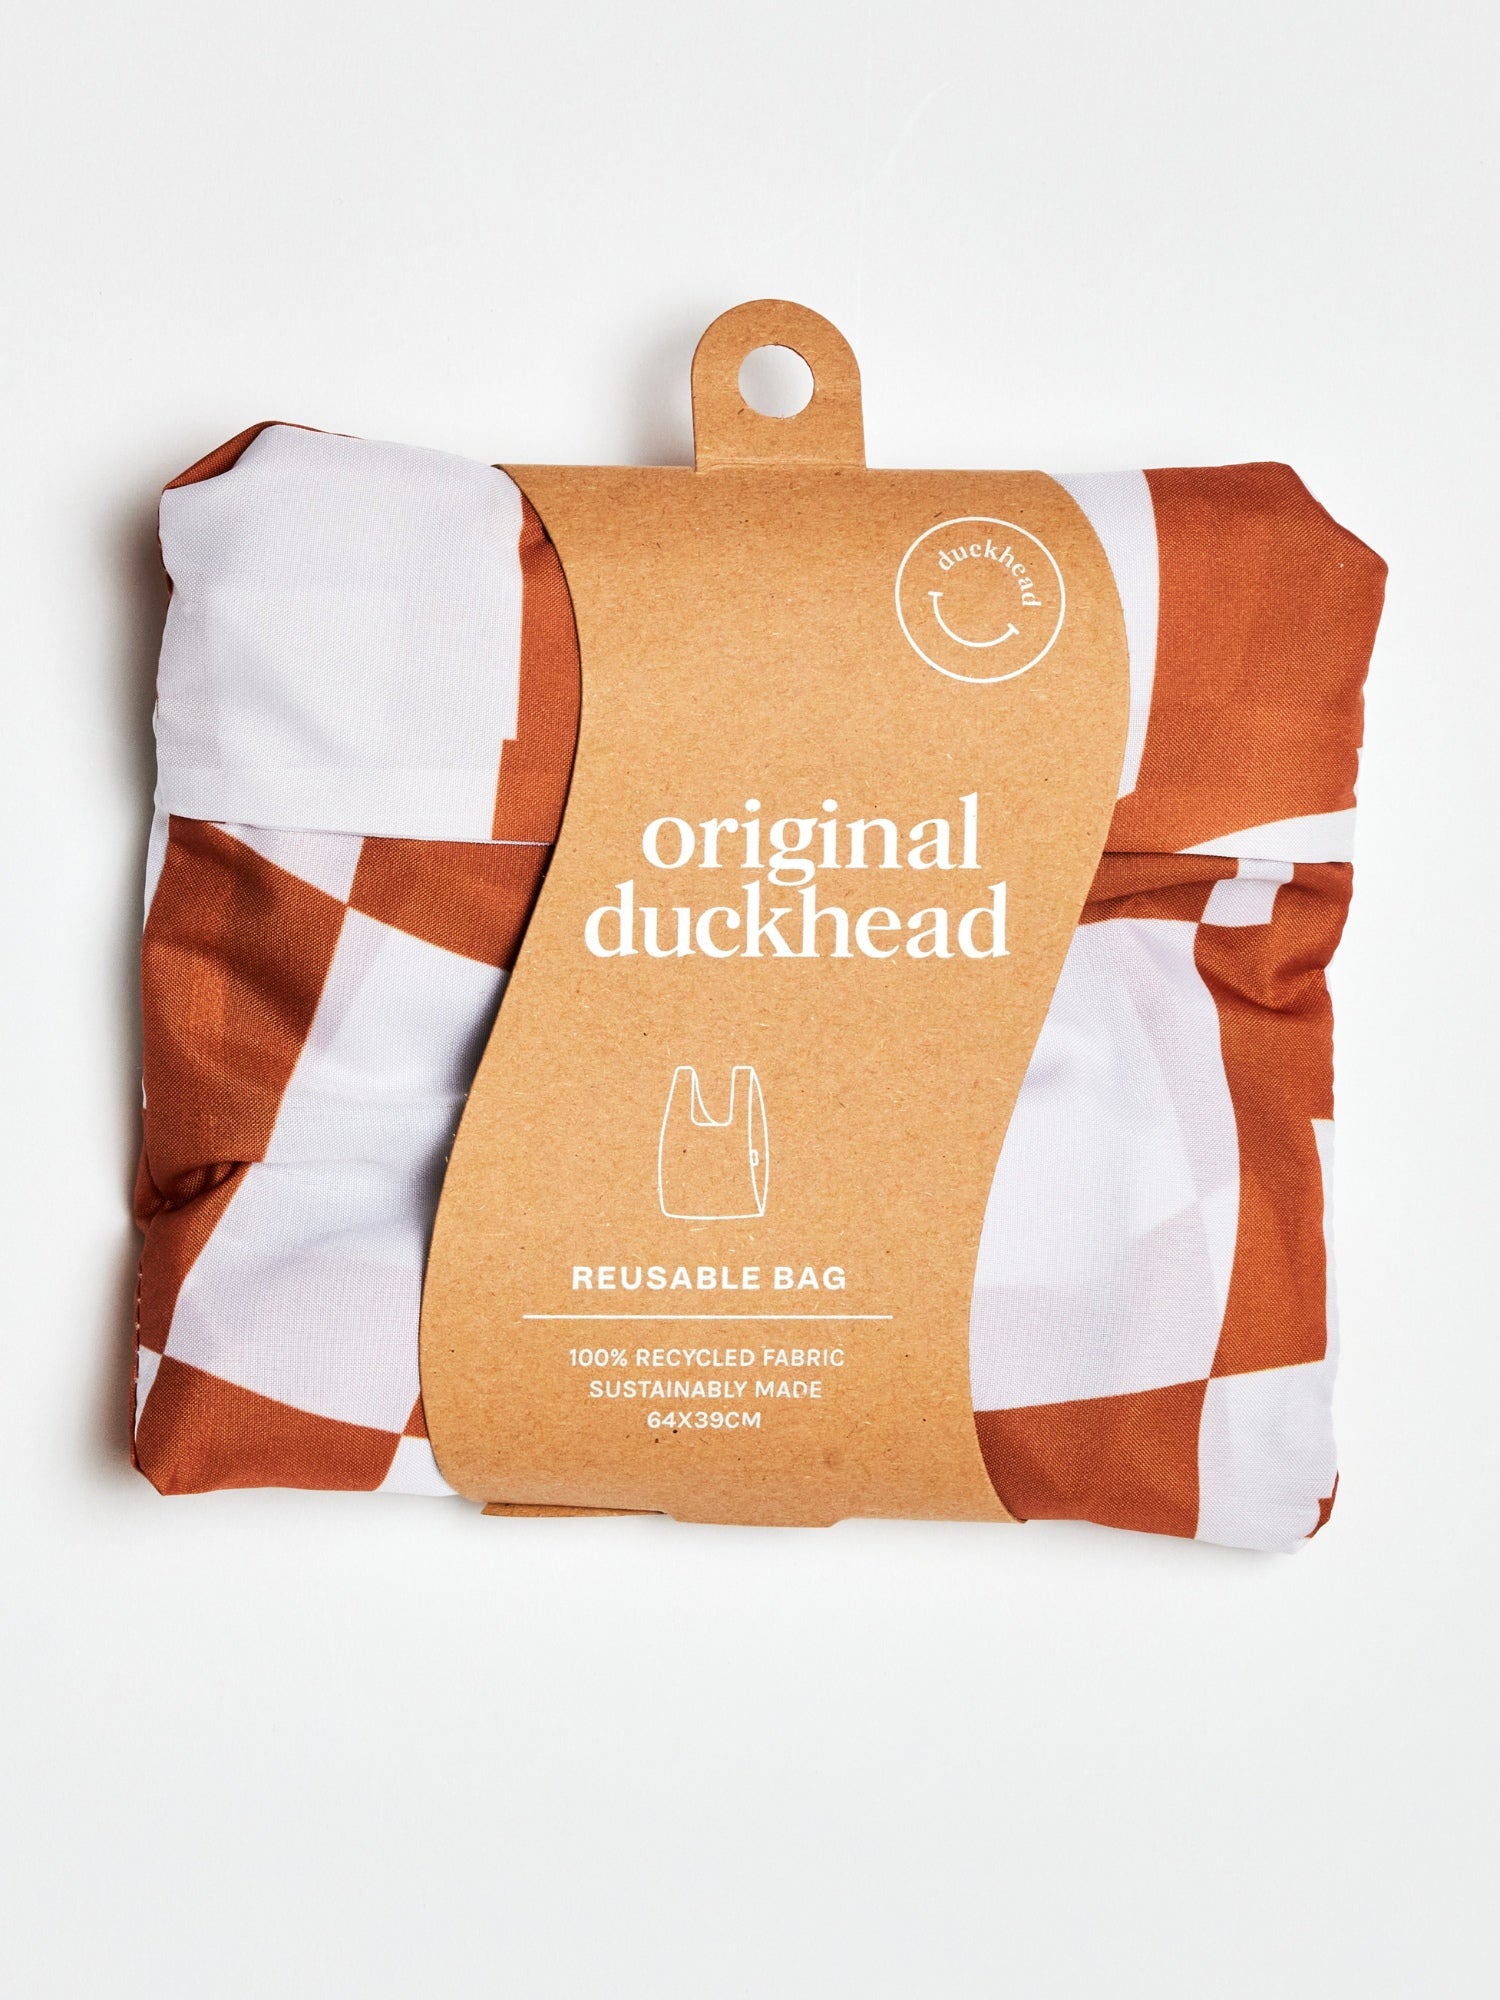 Peanut Butter Checkers Tote Bag.